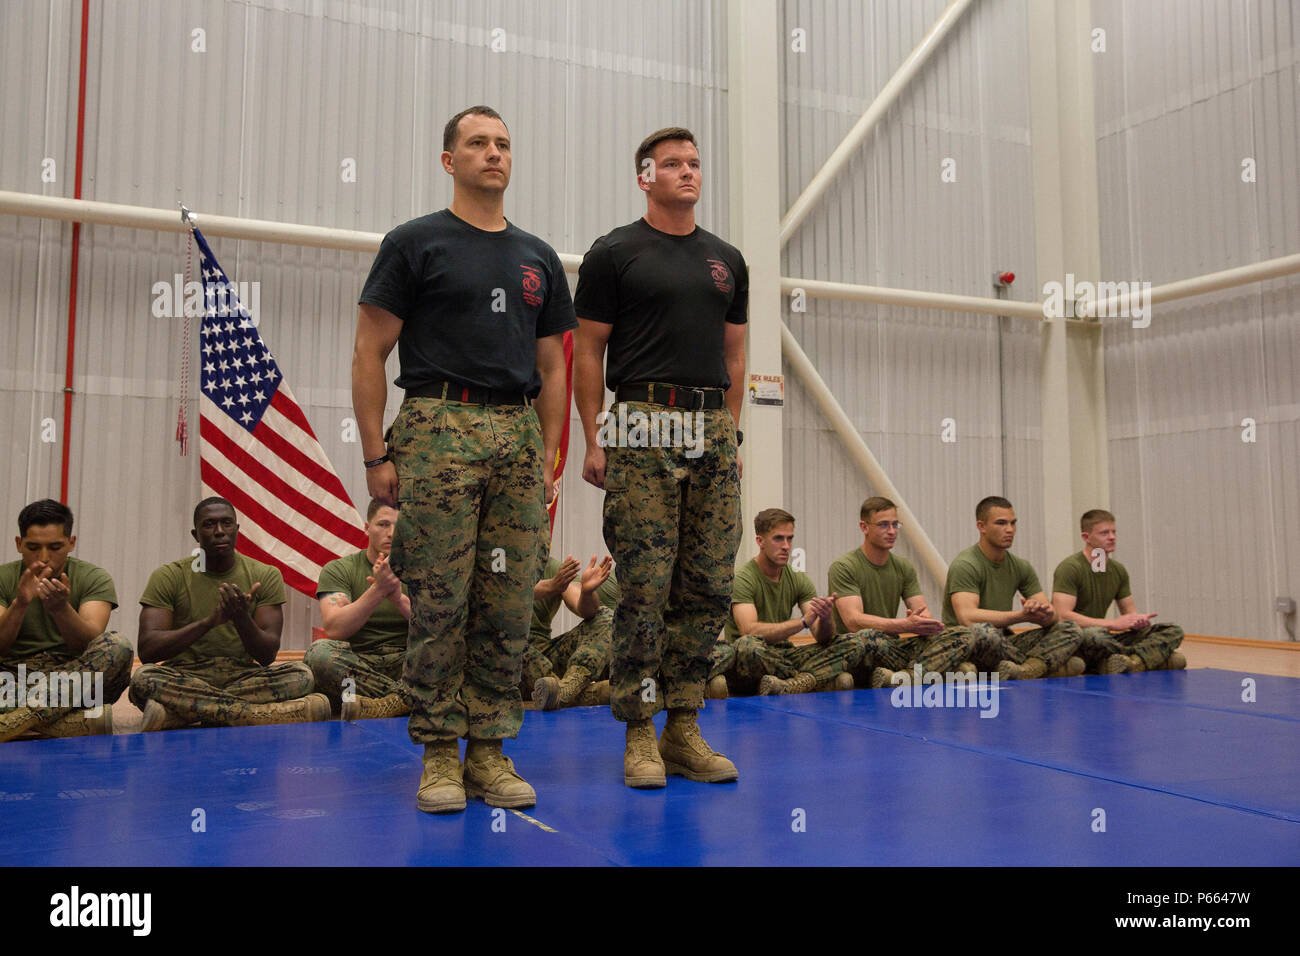 U.S. Marine Corps 1st Lt. Thomas A. White, an infantry officer, and Staff Sgt. Benjamin L. Tupaj, a joint terminal attack controller, both with Black Sea Rotational Force, stand at the position of attention as they are recognized by Marines and sailors for their hard work as the Marine Corps Martial Arts Instructor Trainers of class 155-16. The instructors stressed to the students over the weeks that an equal growth of their mental, character and physical disciplines are essential as a Martial Arts Instructors. (U.S. Marine Corps photo by Cpl. Kelly L. Street, 2D MARDIV COMCAM/Released) Stock Photo